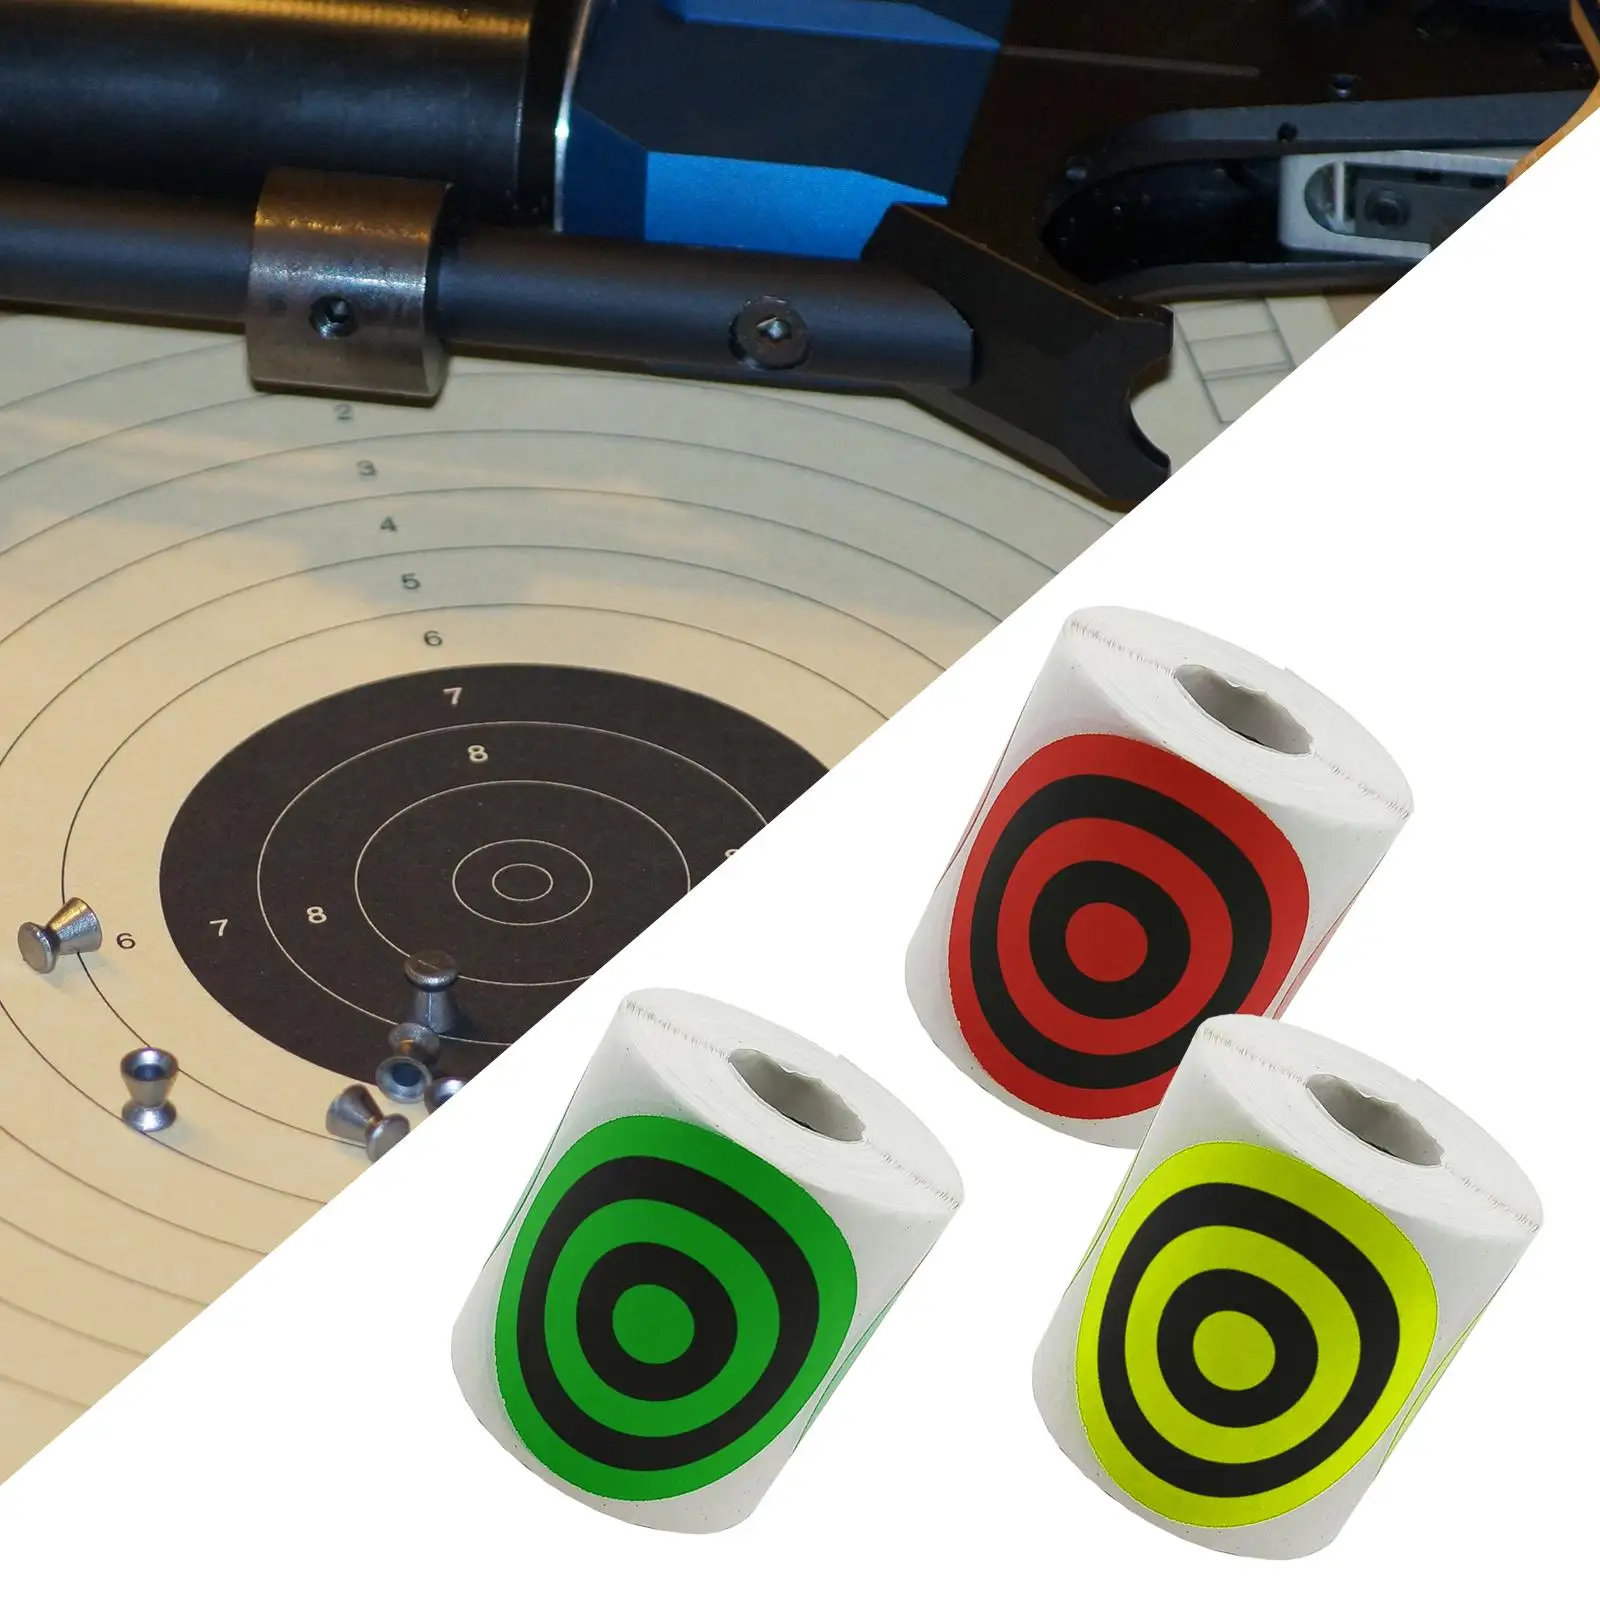 3 Inch  Stickers, Reactive Targets, Self- Paper, Durable  Sticker for The